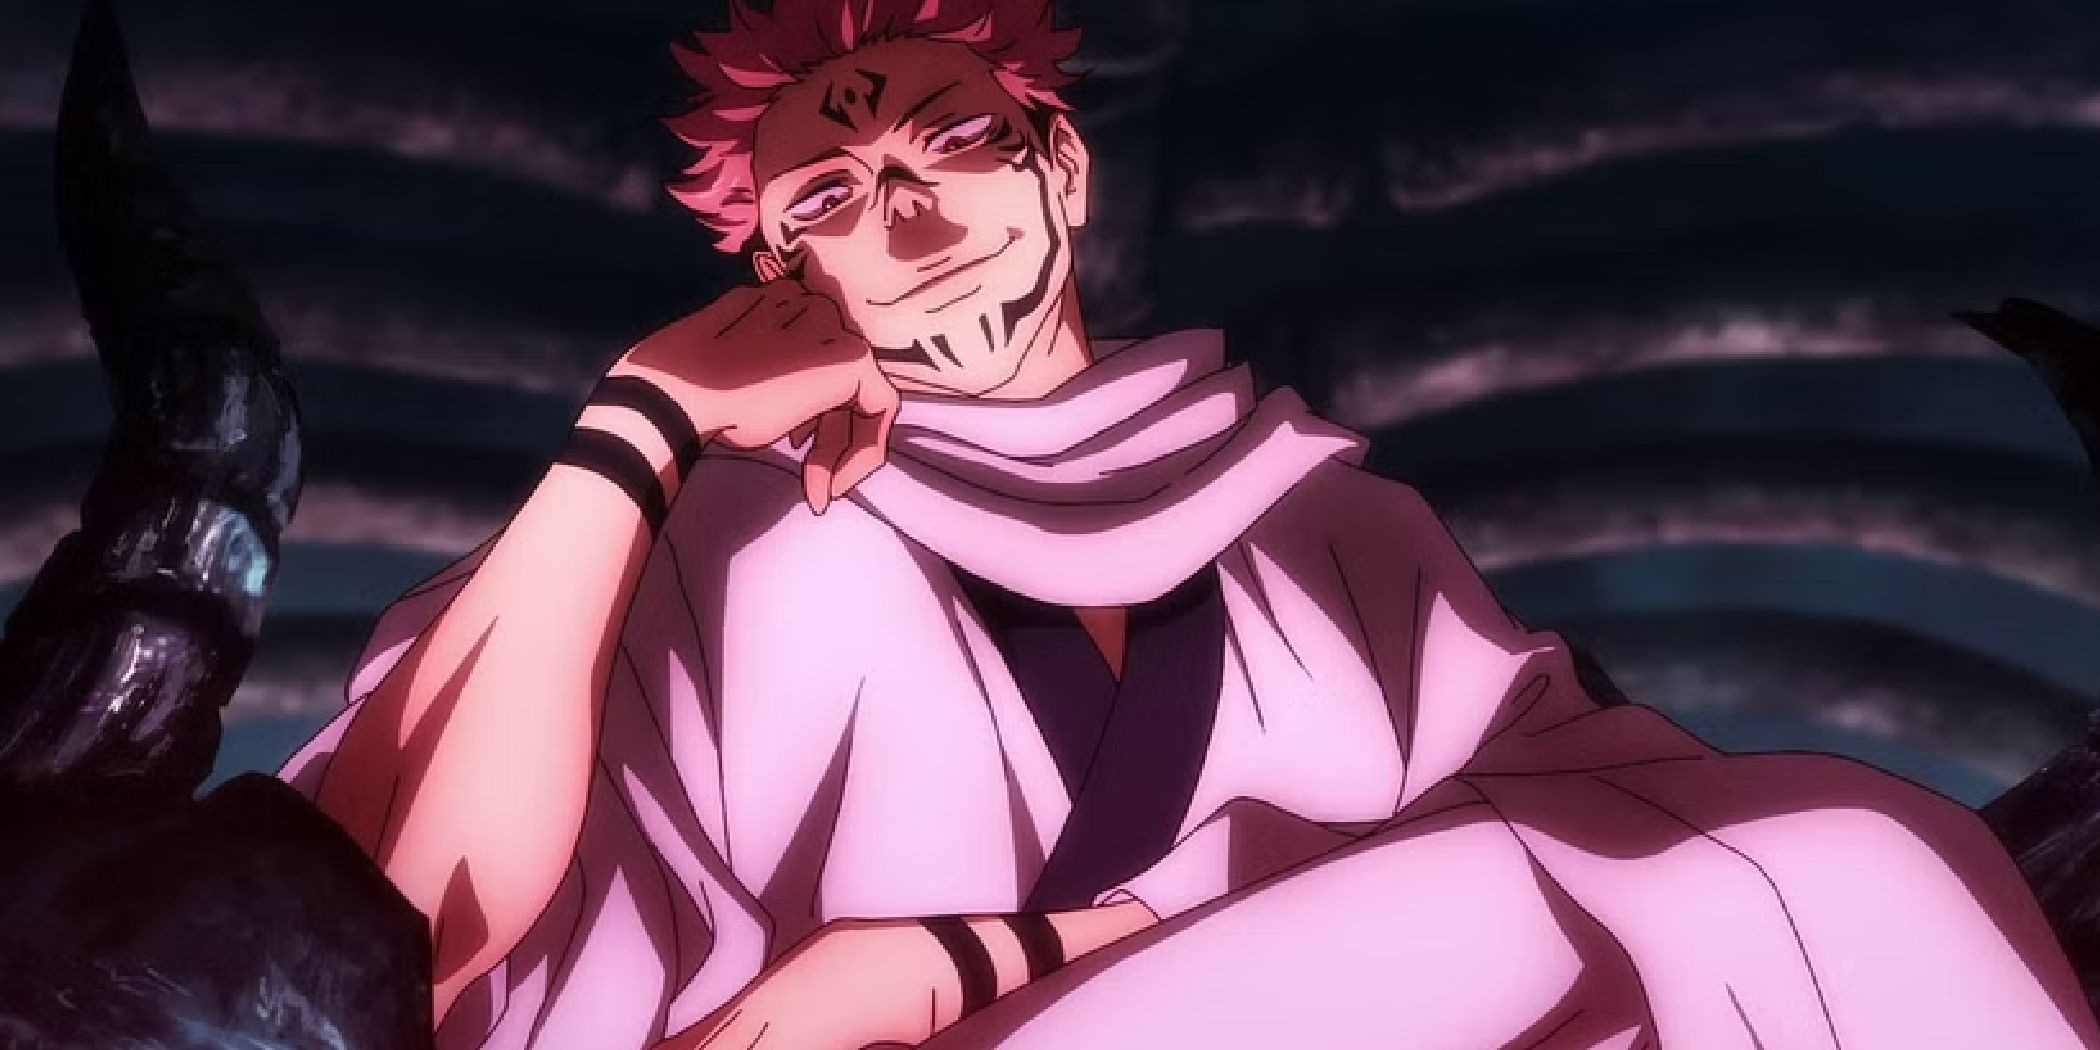 Sukuna from Jujutsu Kaisen sitting on his thrown with a hand on his cheek.